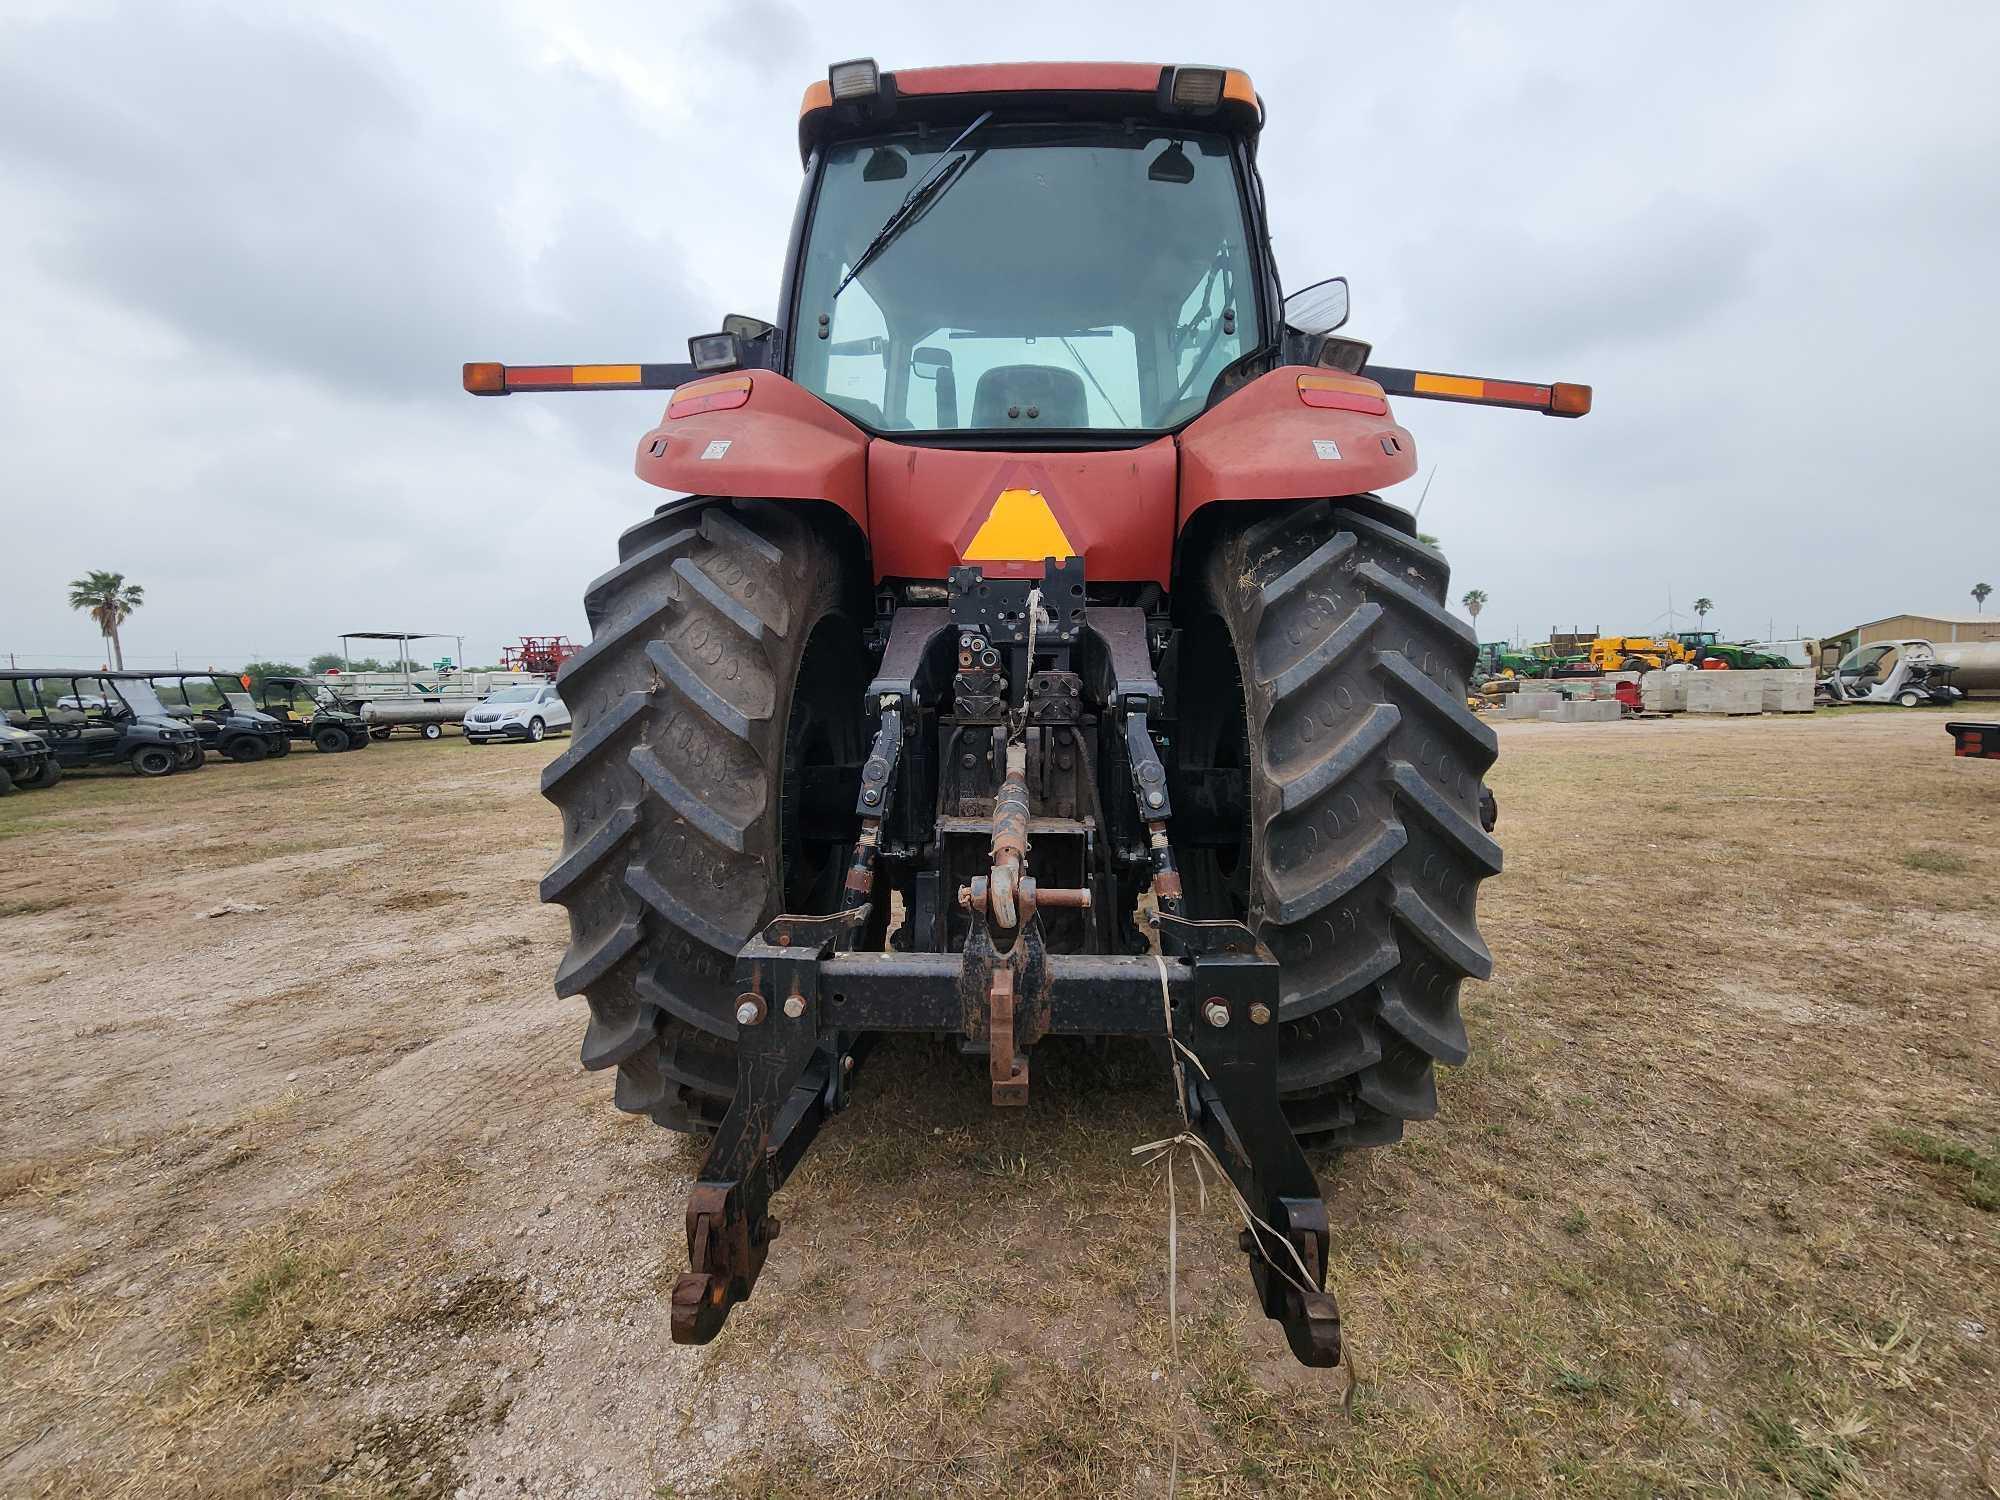 Case IH 275 Tractor